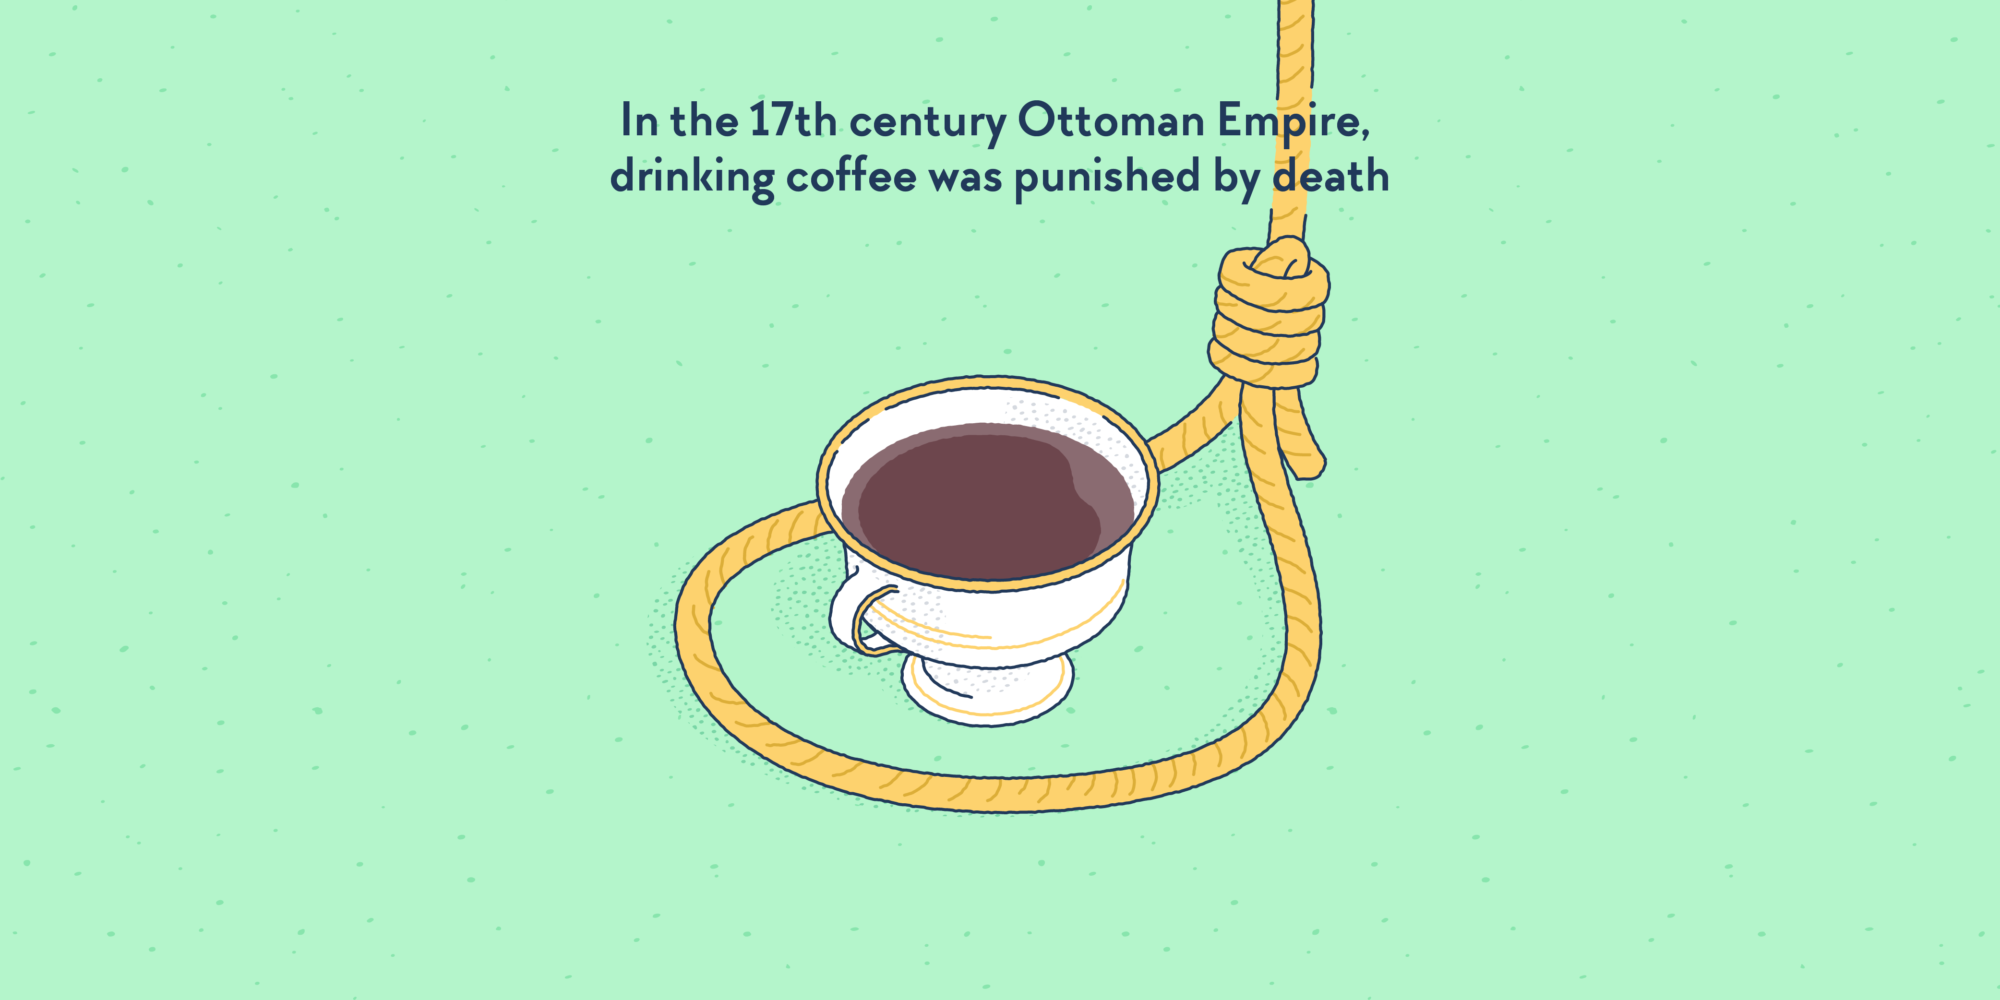 A coffee cup encircled by a hangman's knot